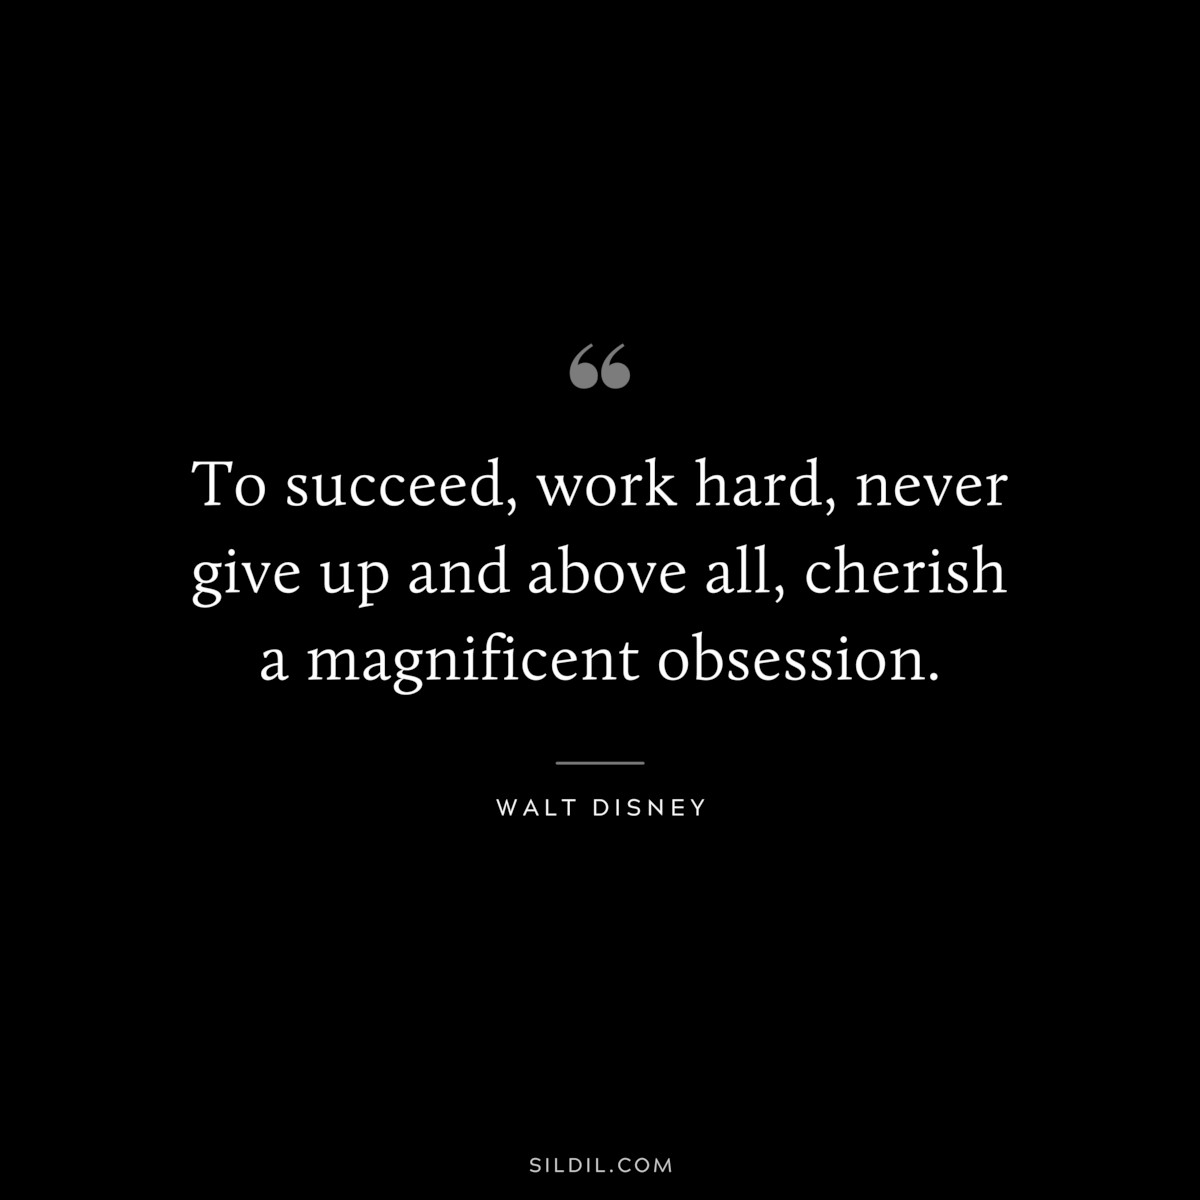 To succeed, work hard, never give up and above all, cherish a magnificent obsession. ― Walt Disney